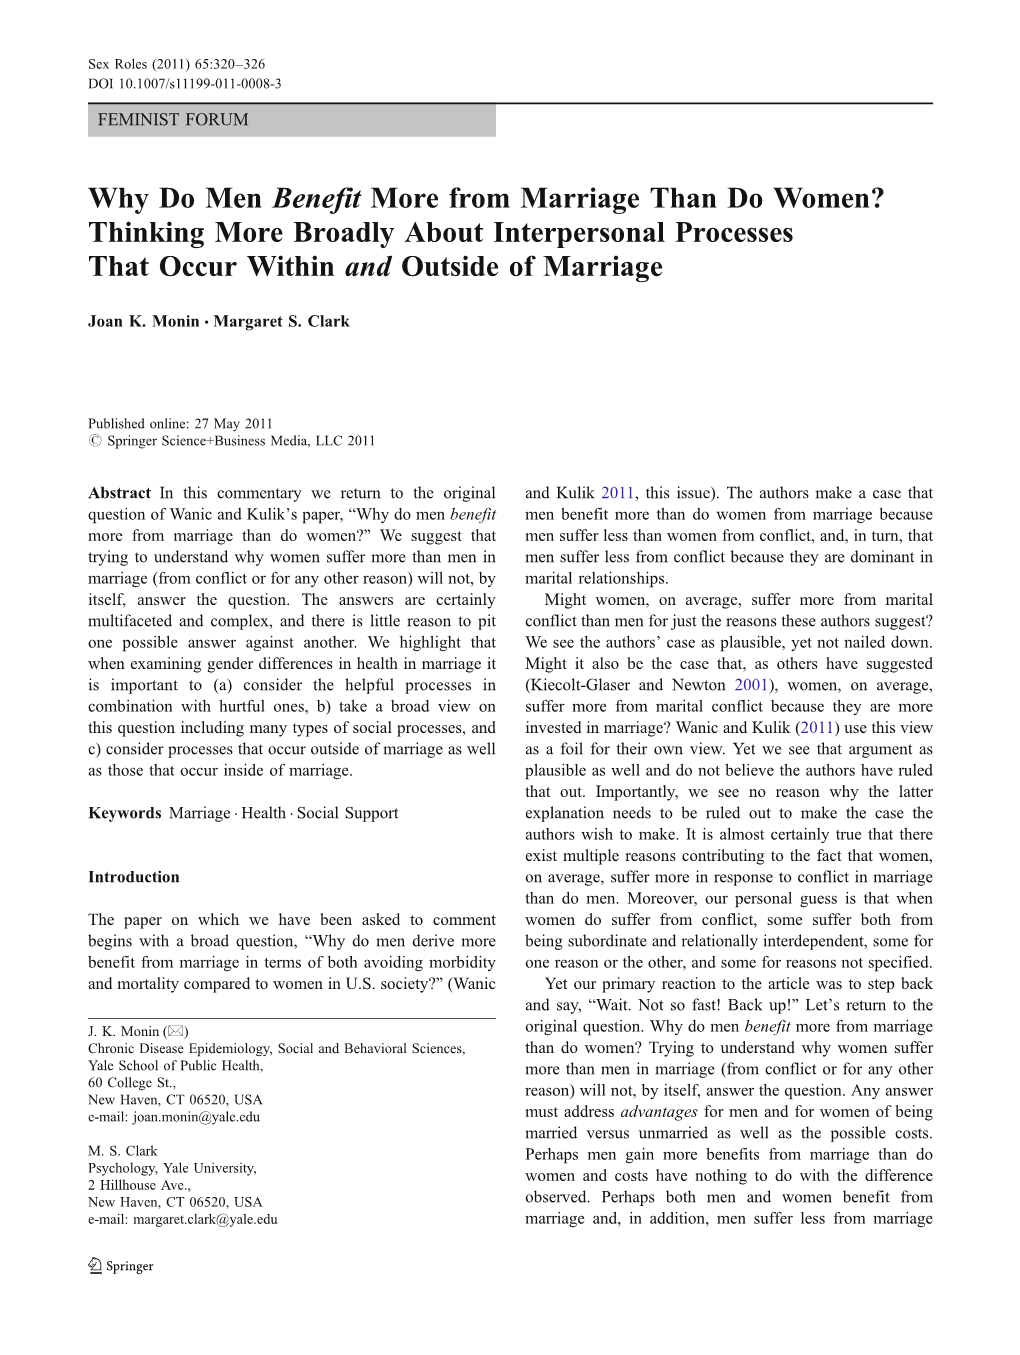 Why Do Men Benefit More from Marriage Than Do Women? Thinking More Broadly About Interpersonal Processes That Occur Within and Outside of Marriage